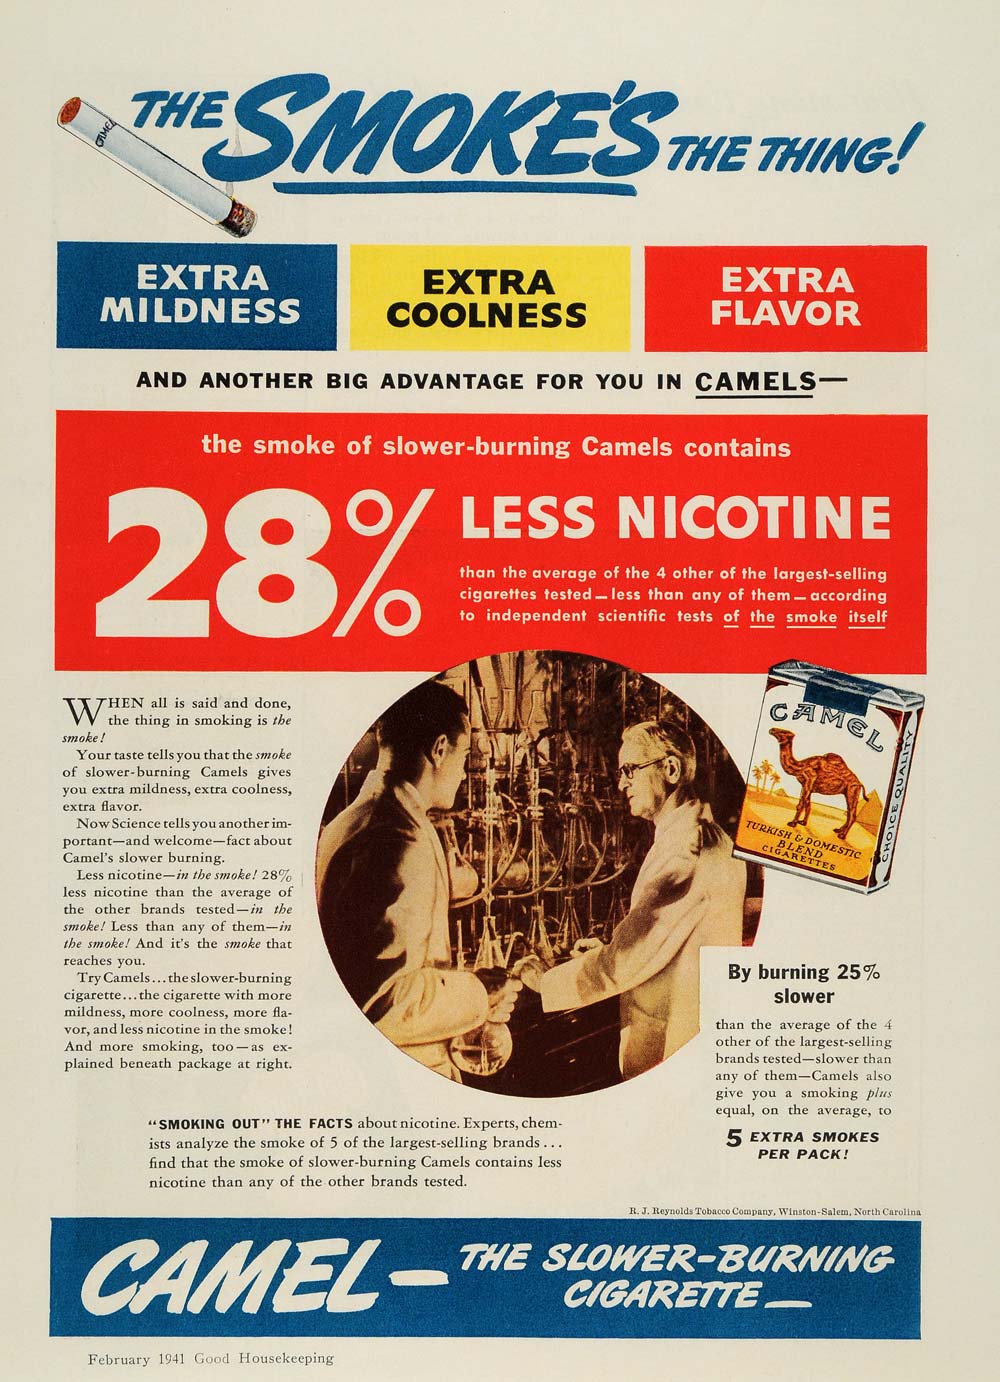 1941 Ad Smoking Out the Facts Nicotine Camel Cigarettes - ORIGINAL GH4